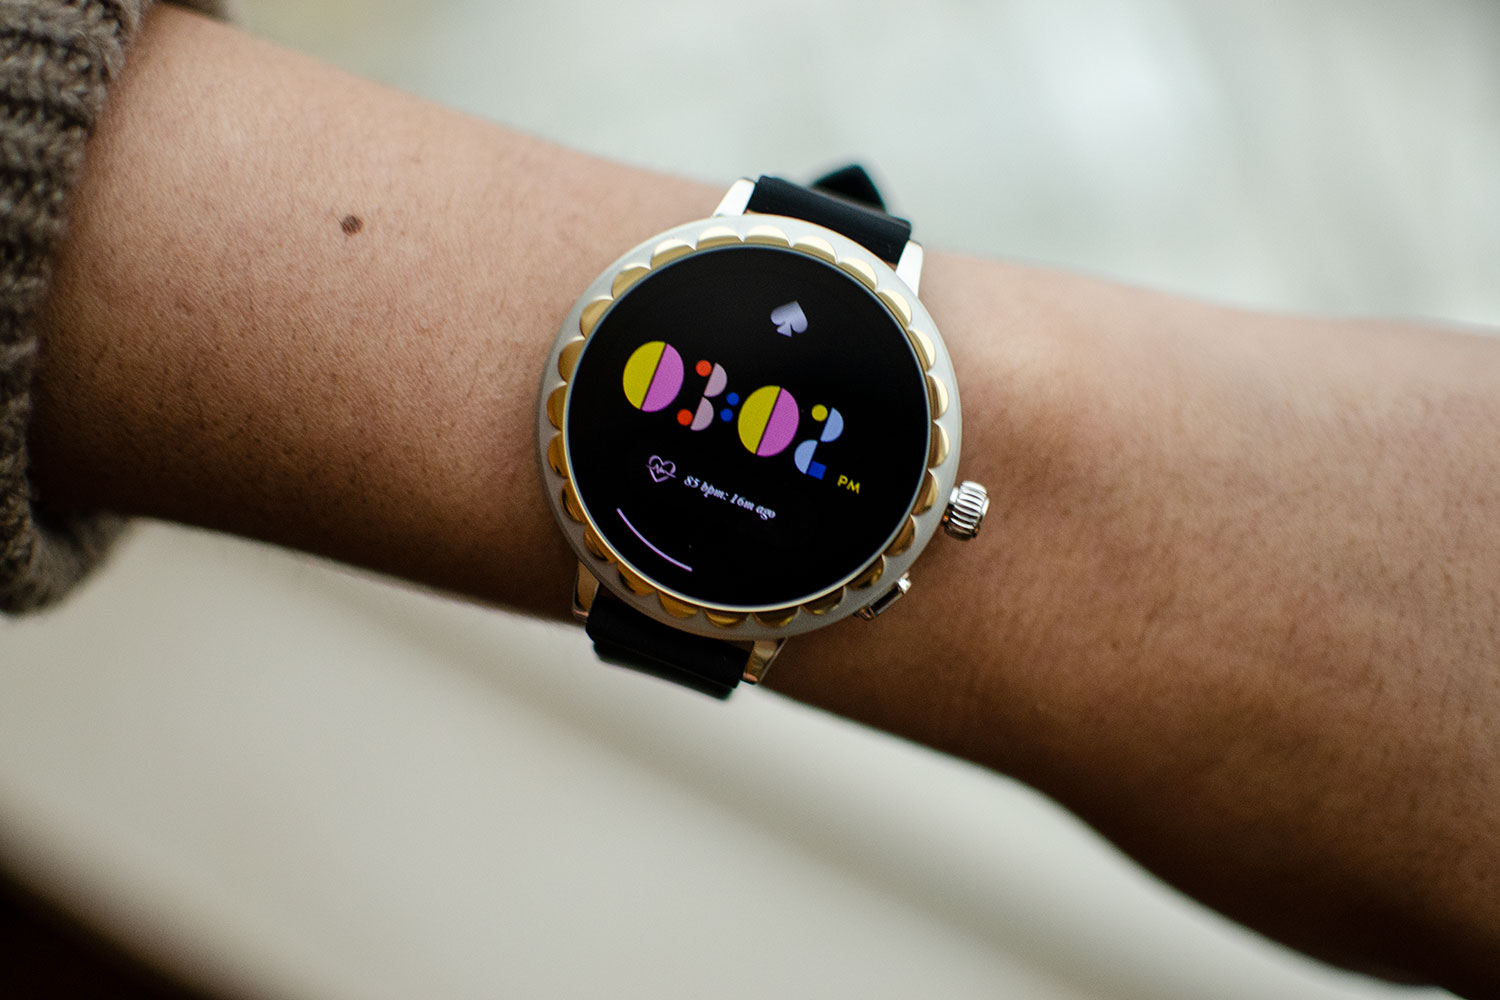 Fishing for Compliments? Put on Kate Spade's New Scallop 2 Smartwatch |  Digital Trends